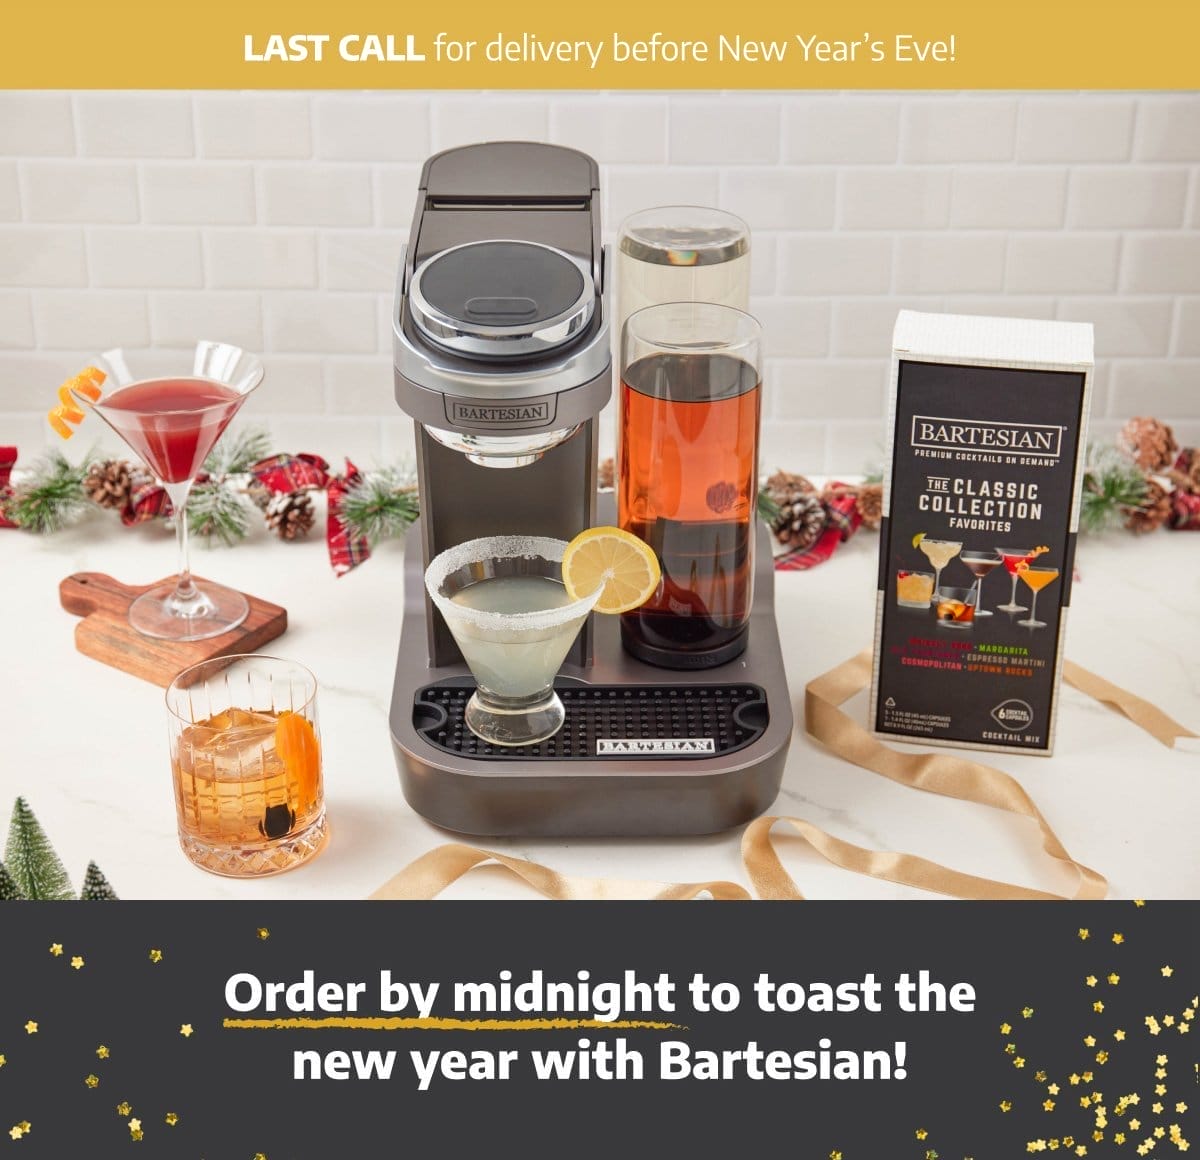 Last call for delivery before New Year's Eve!